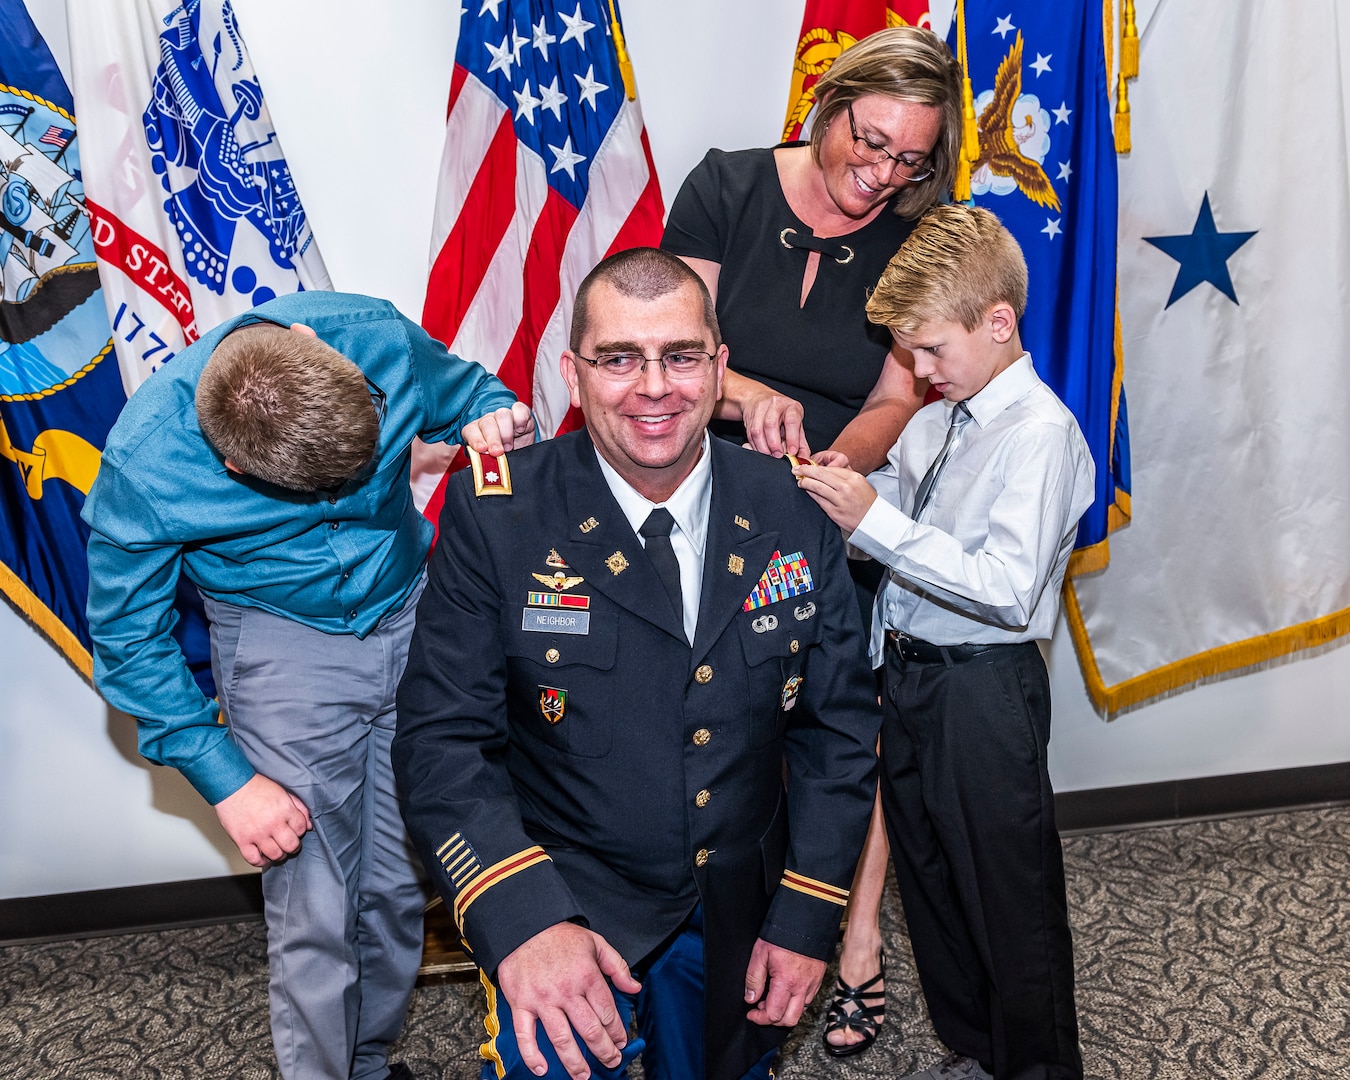 Family replaces rank patches on Army officer's uniform with new rank.